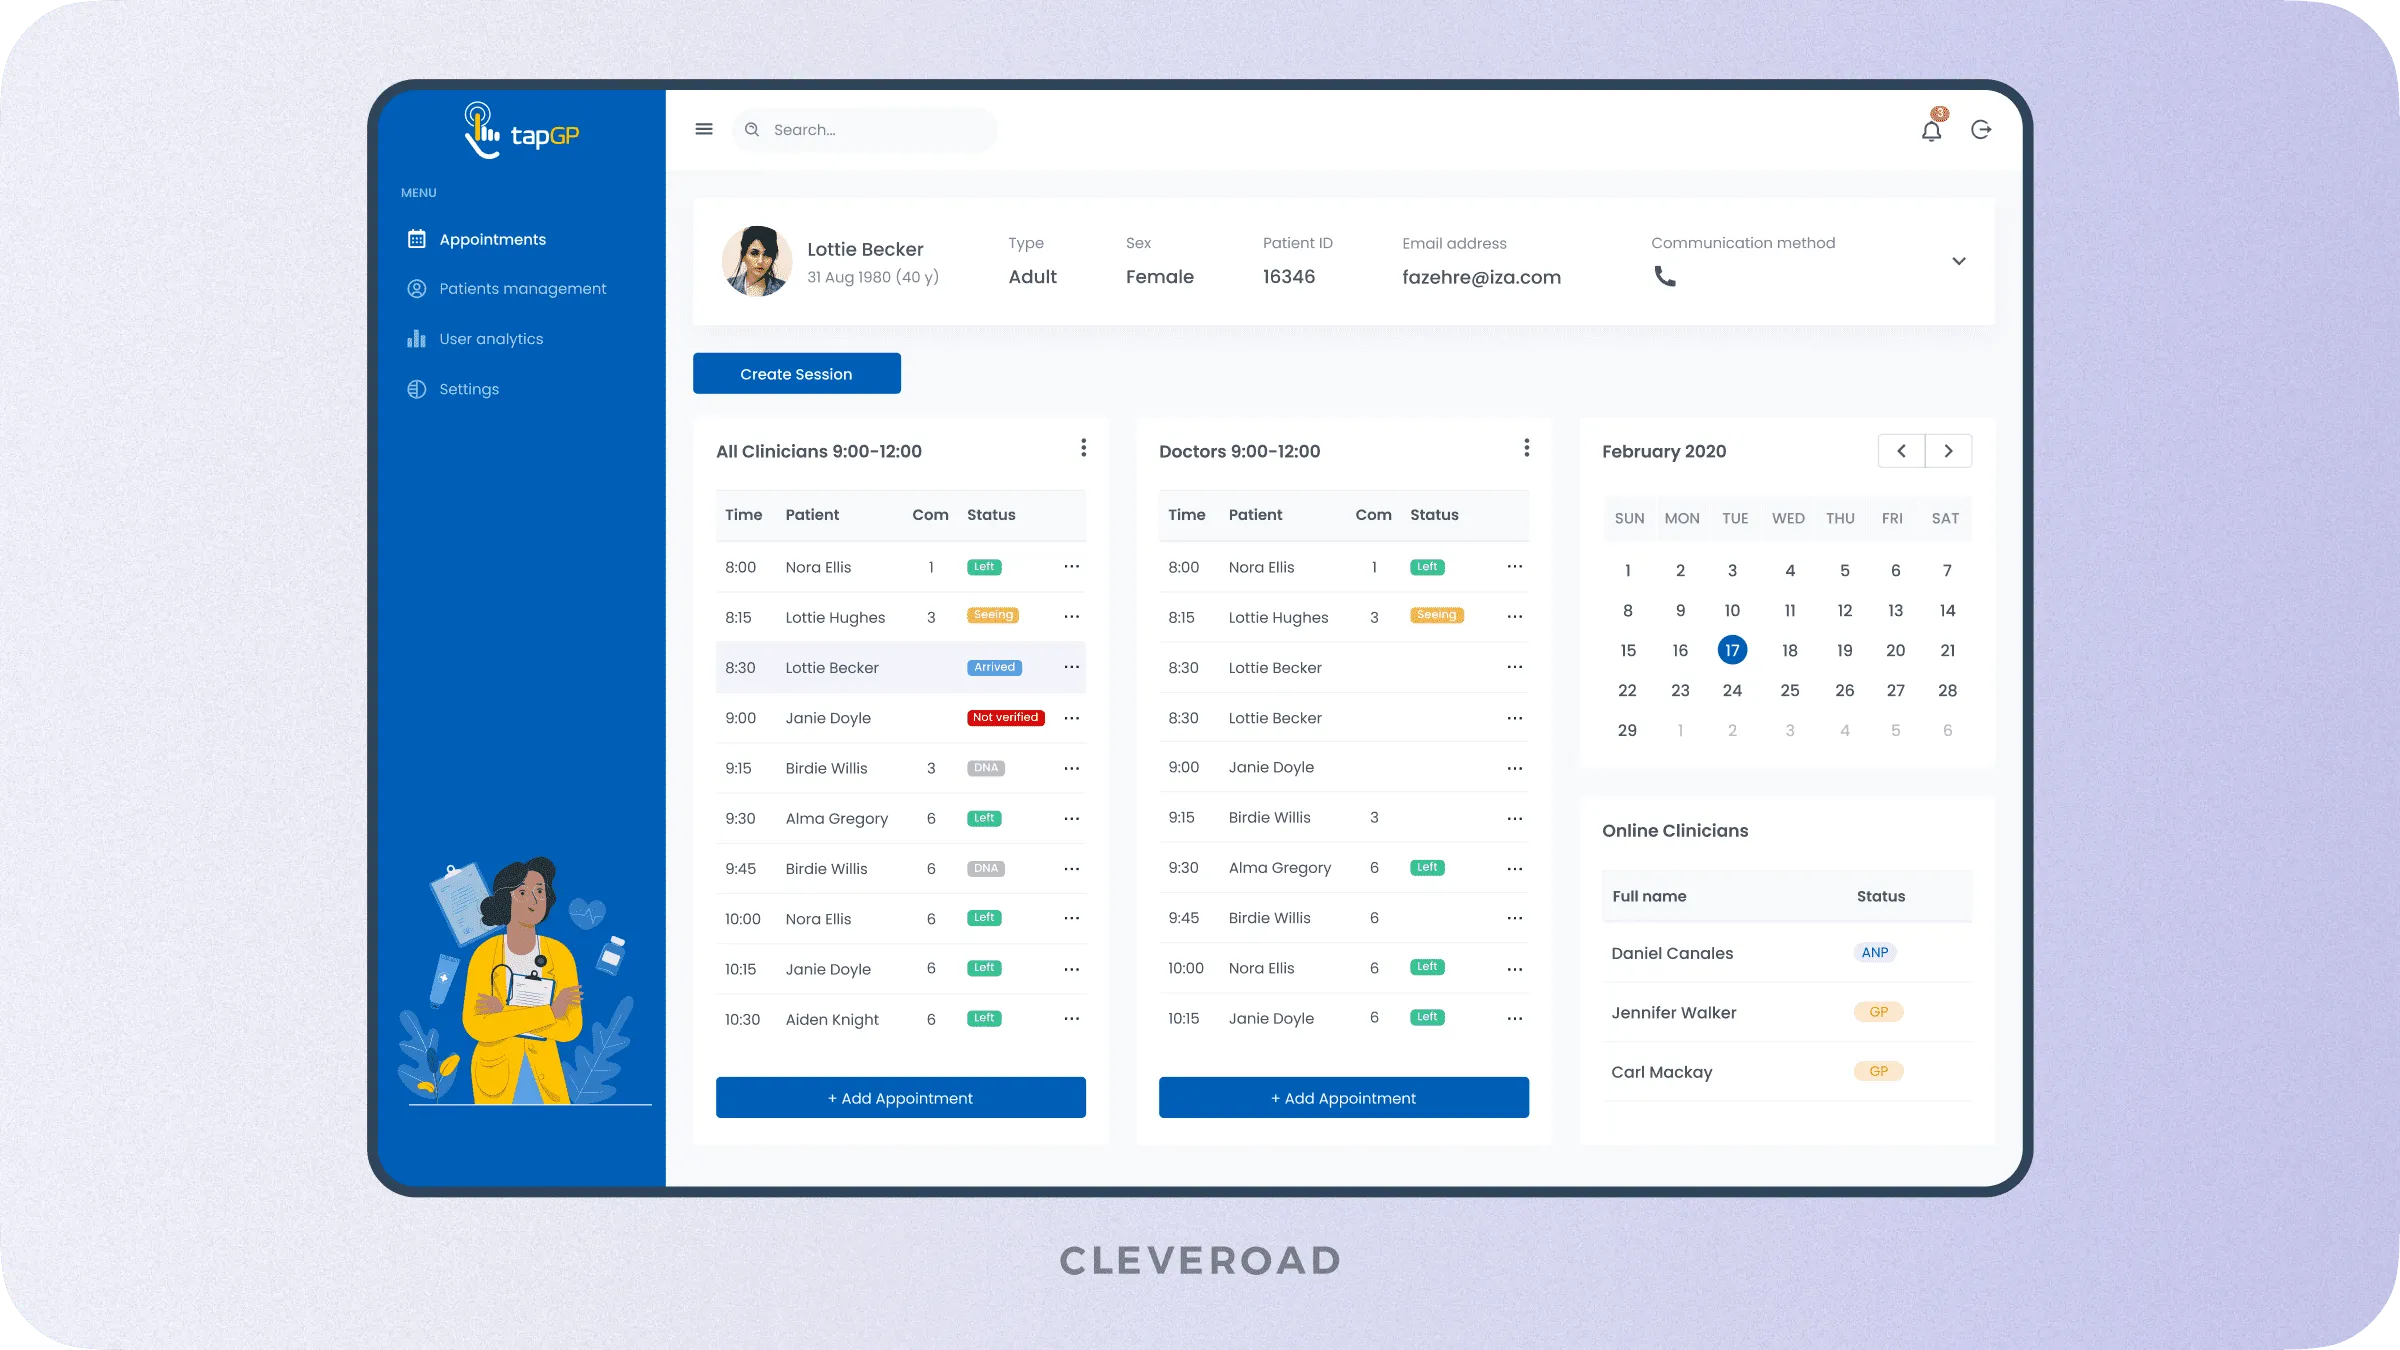 Telehealth platform created by Cleveroad